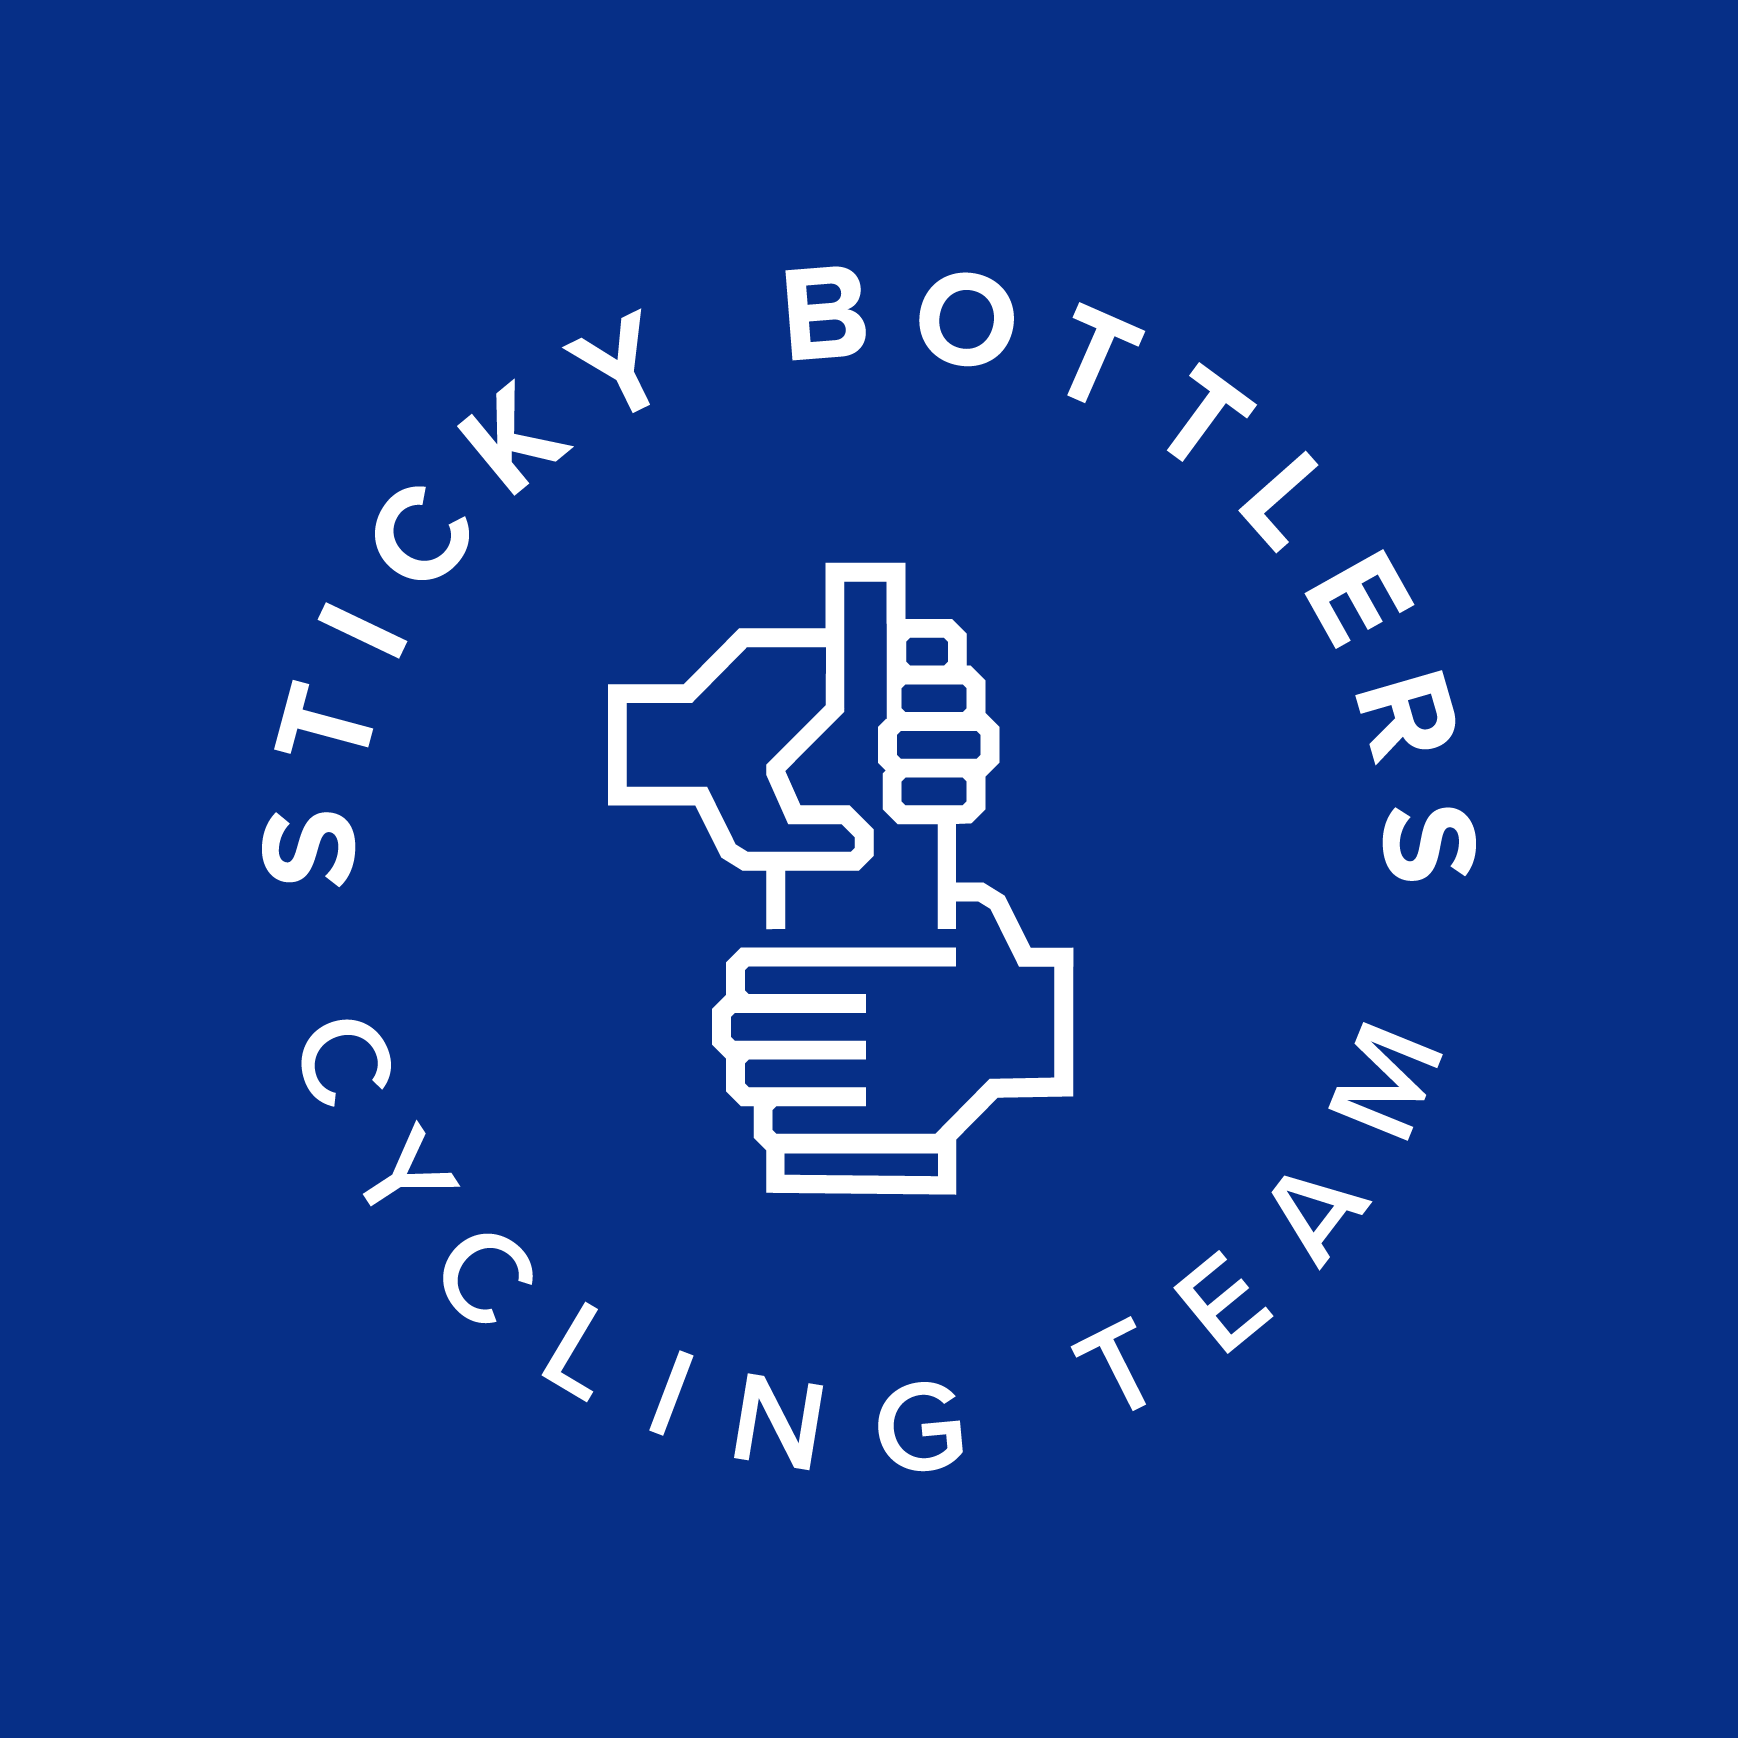 Club Image for STICKY BOTTLERS